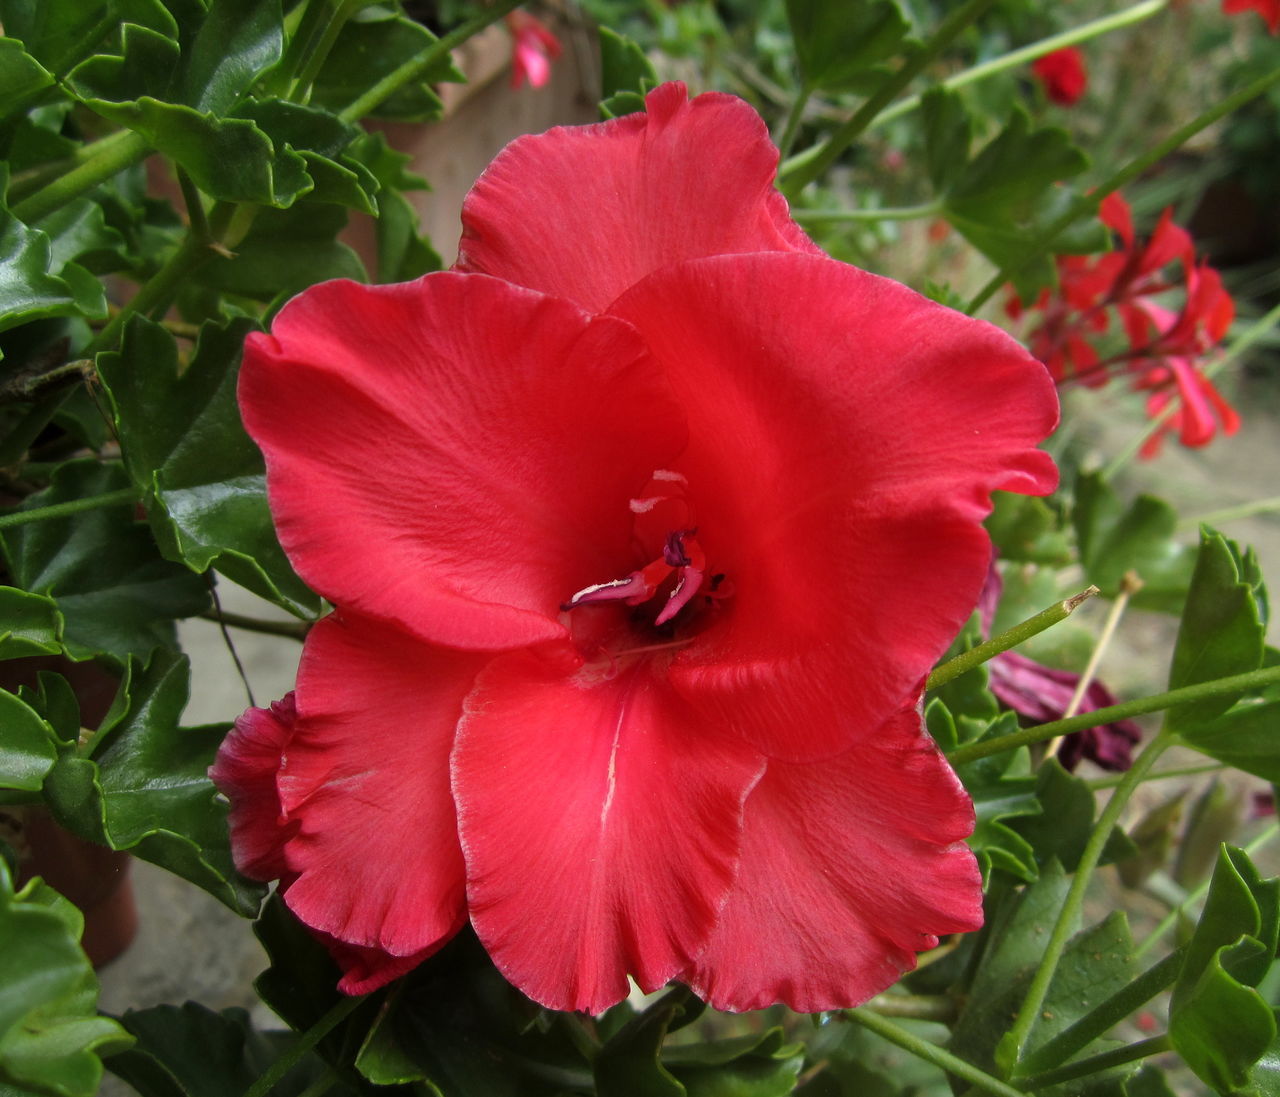 flower, flowering plant, plant, freshness, beauty in nature, petal, inflorescence, flower head, fragility, red, hibiscus, close-up, growth, nature, plant part, leaf, pollen, no people, stamen, blossom, malvales, botany, outdoors, springtime, china rose, vibrant color, green